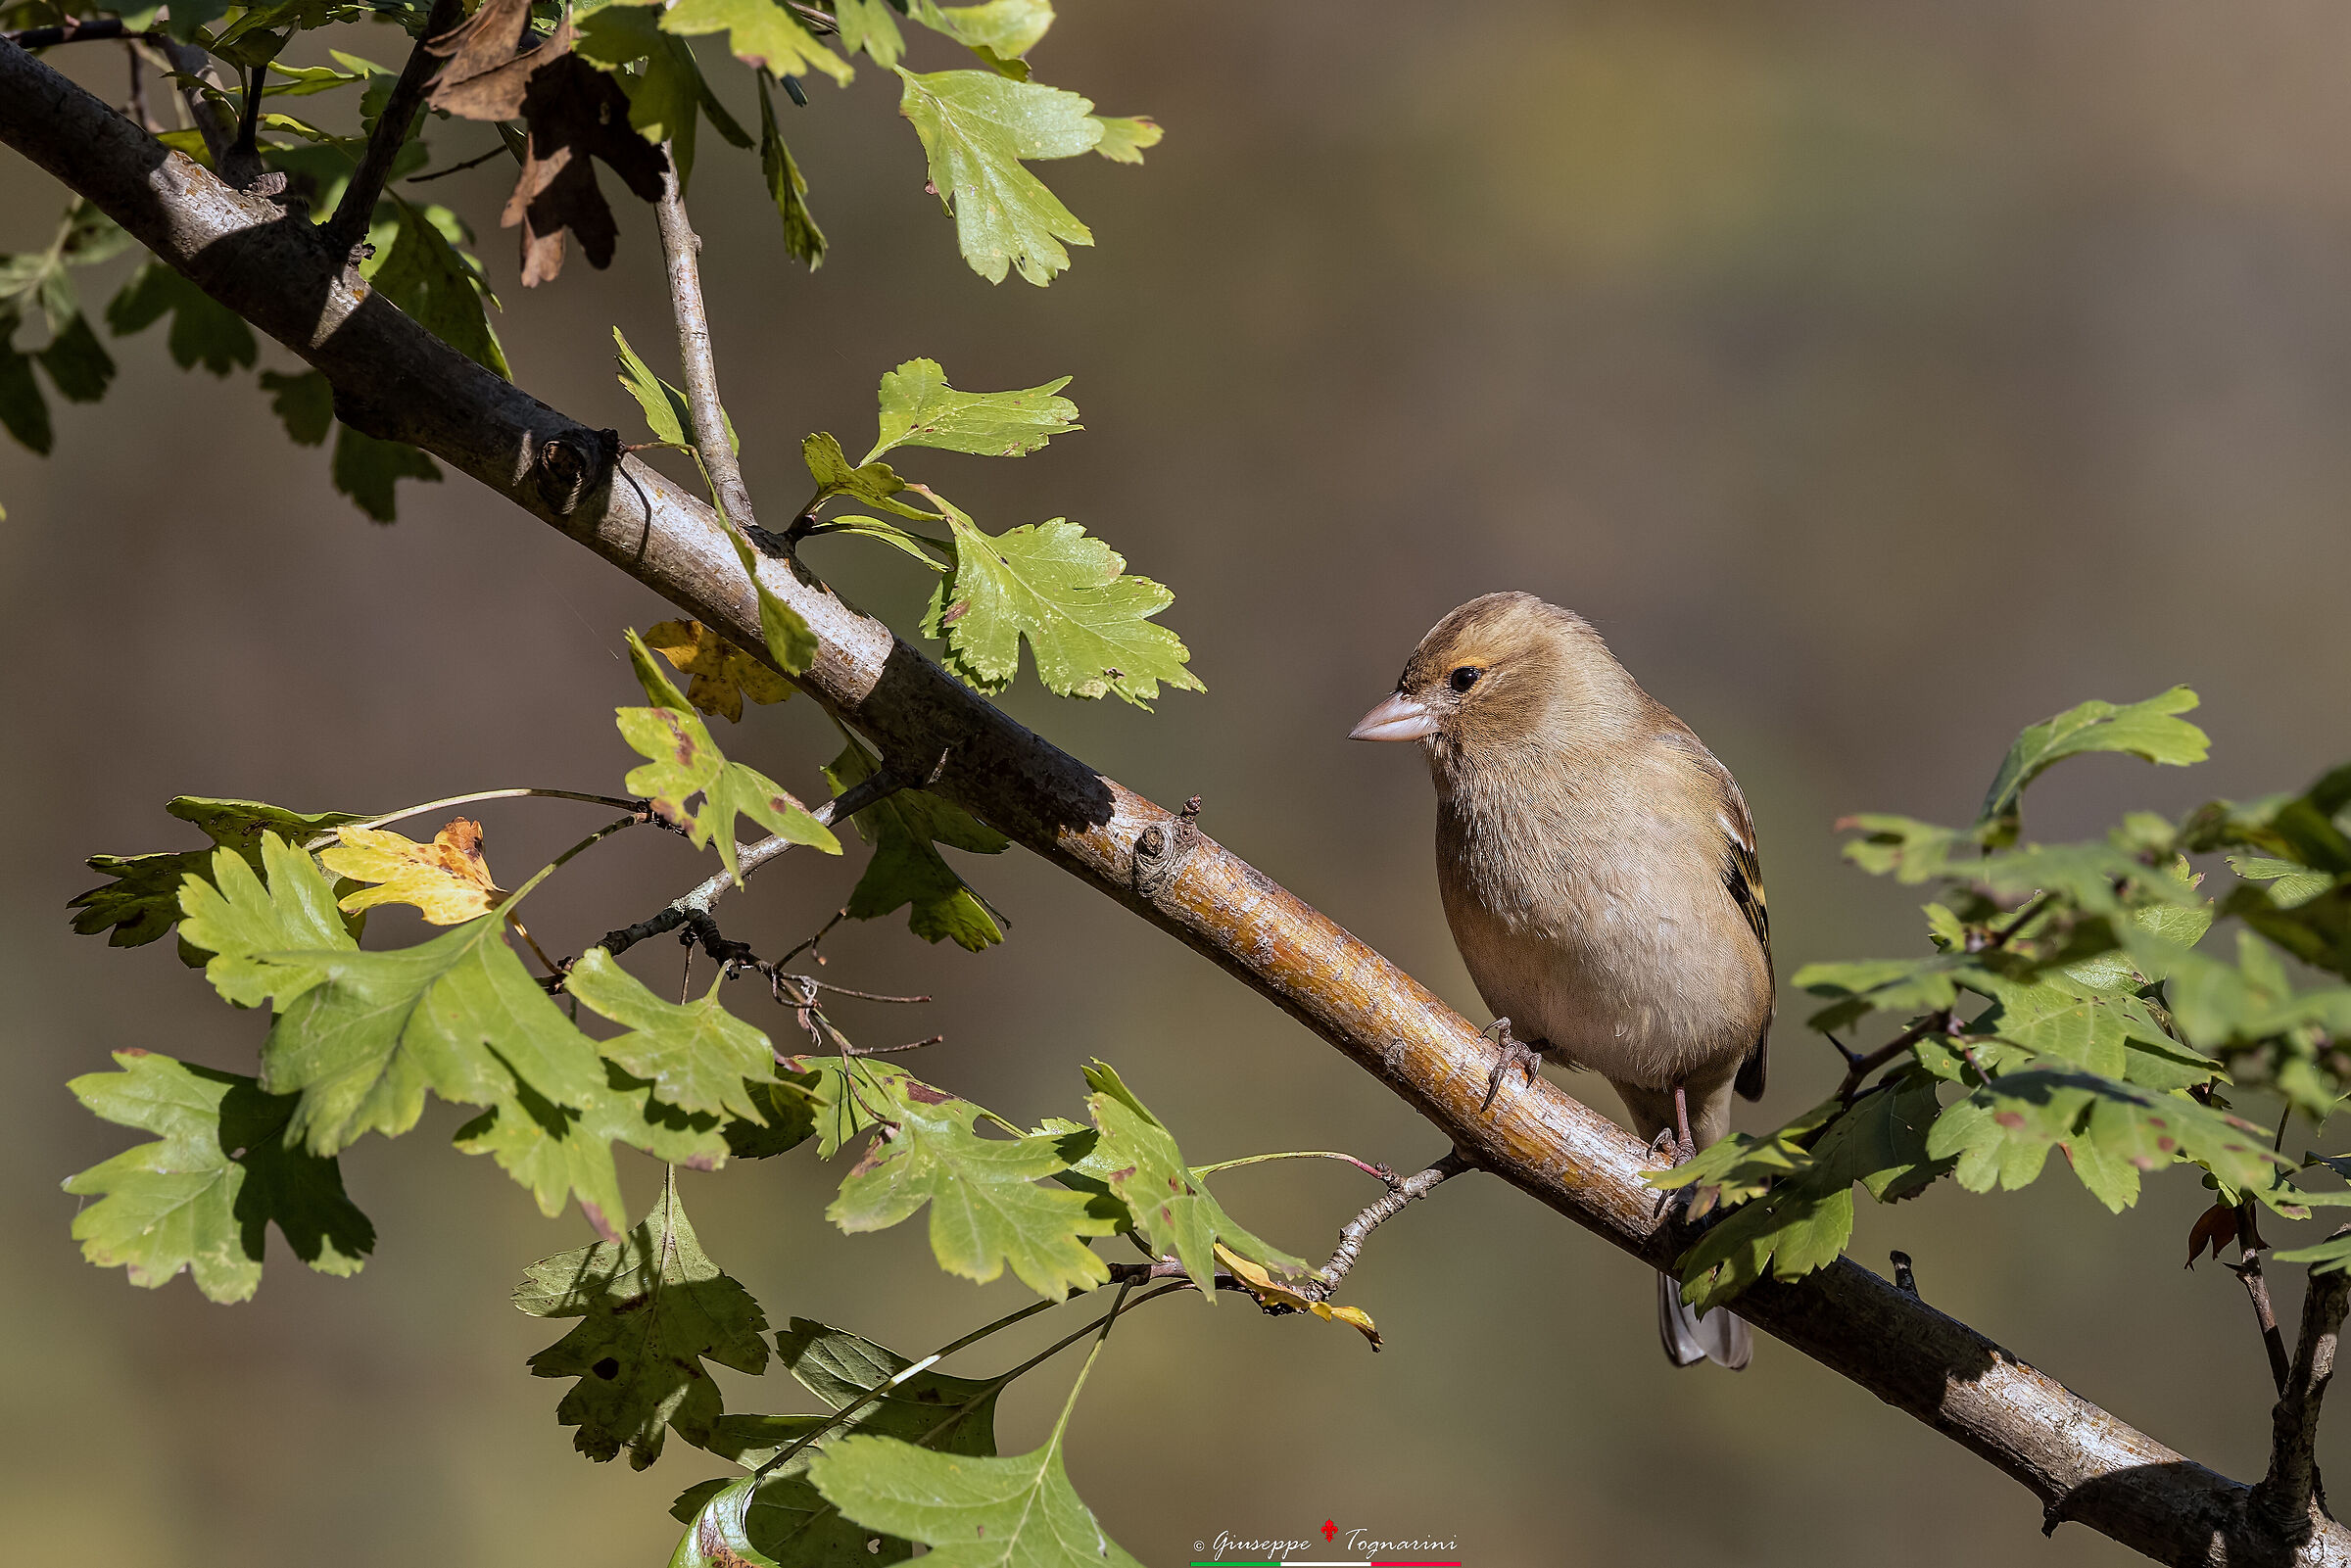 The chaffinch on the branch...